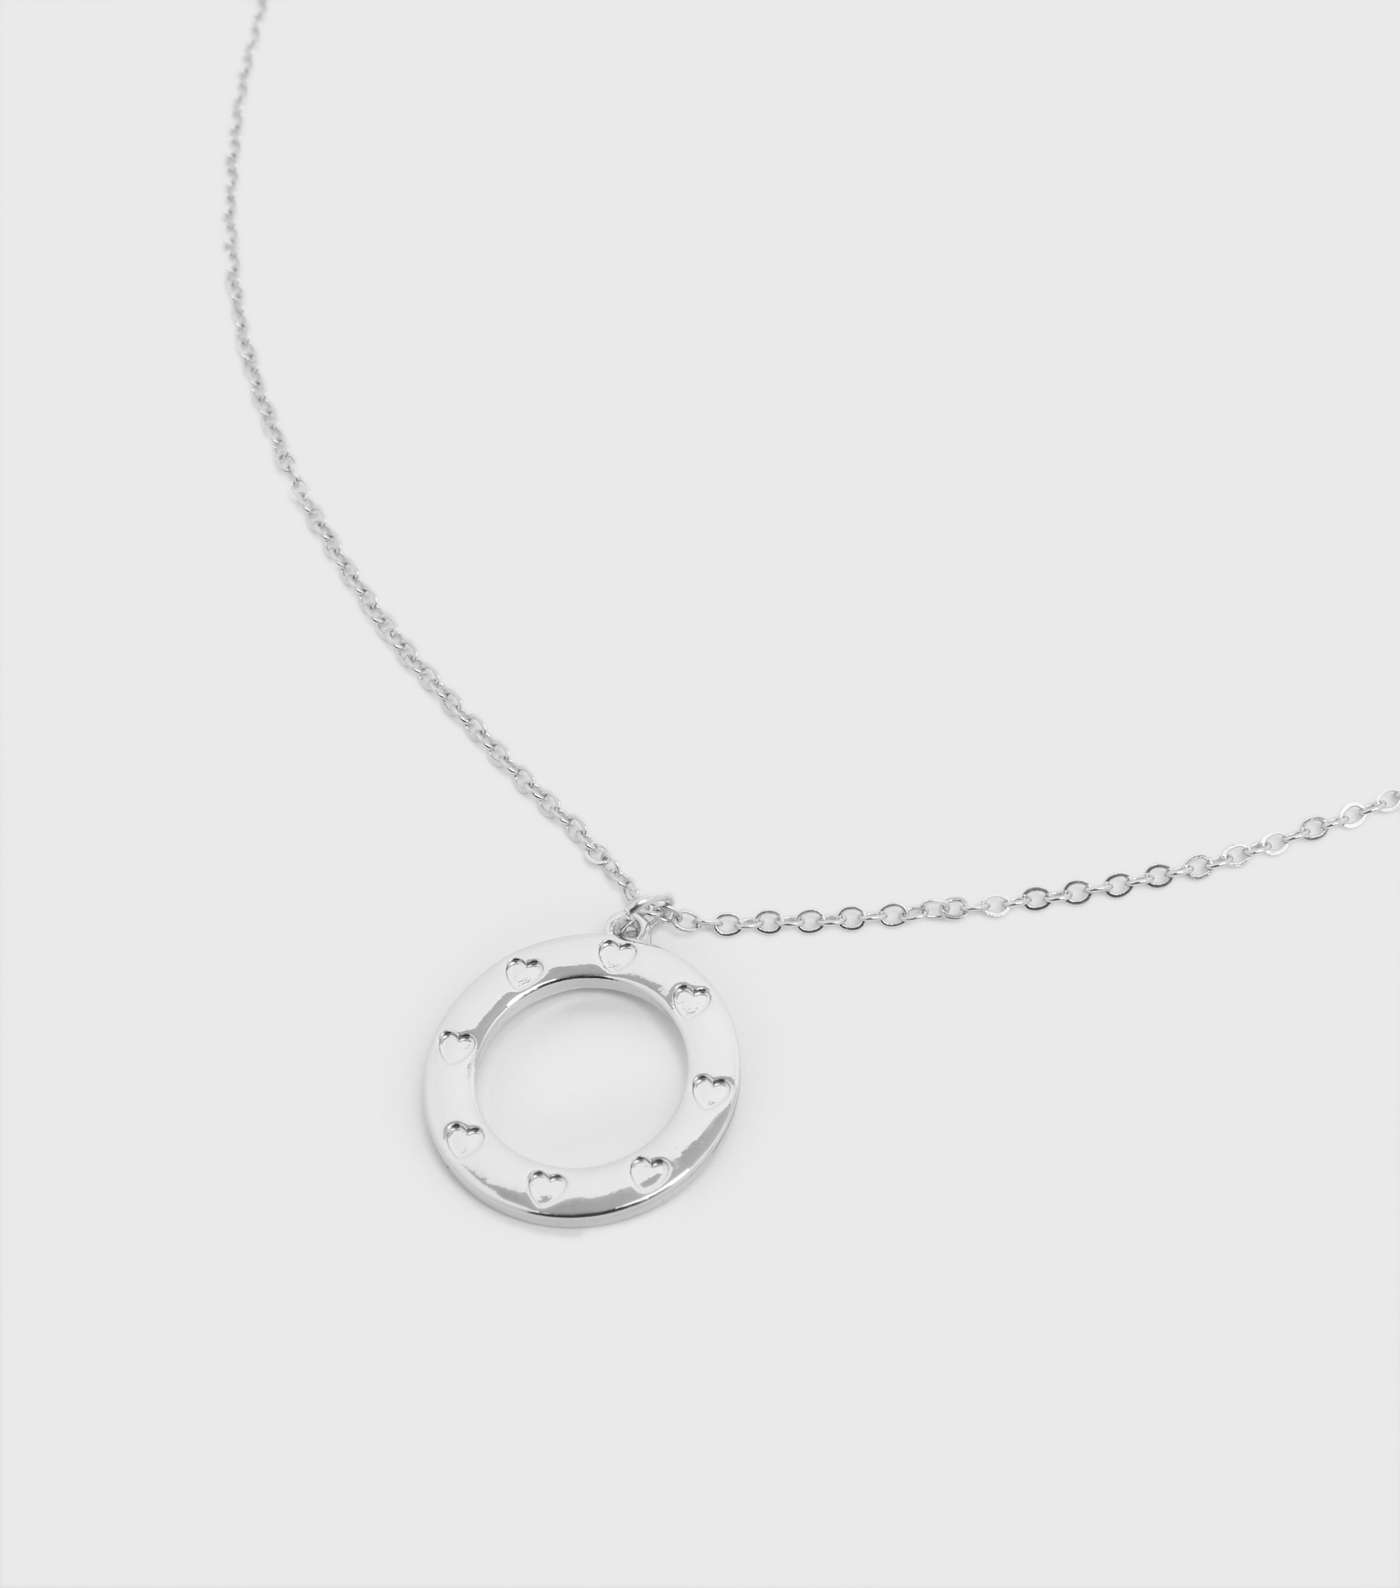 Silver Heart Engraved Circle Pendant Necklace Image 3